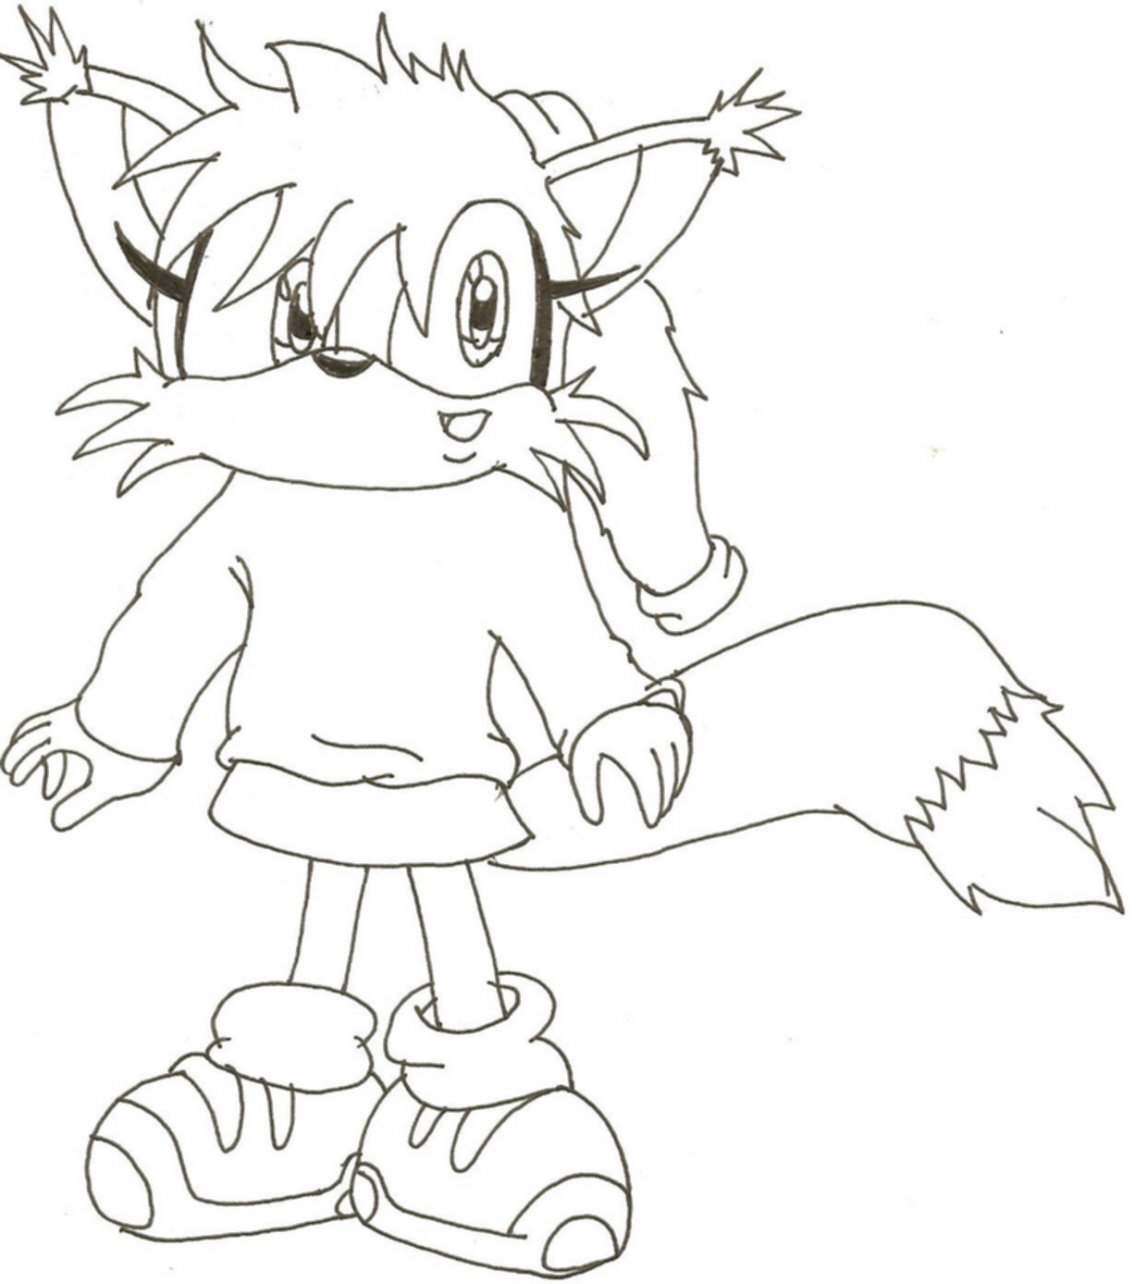 art request for Raccoon1* by jkgoomba89